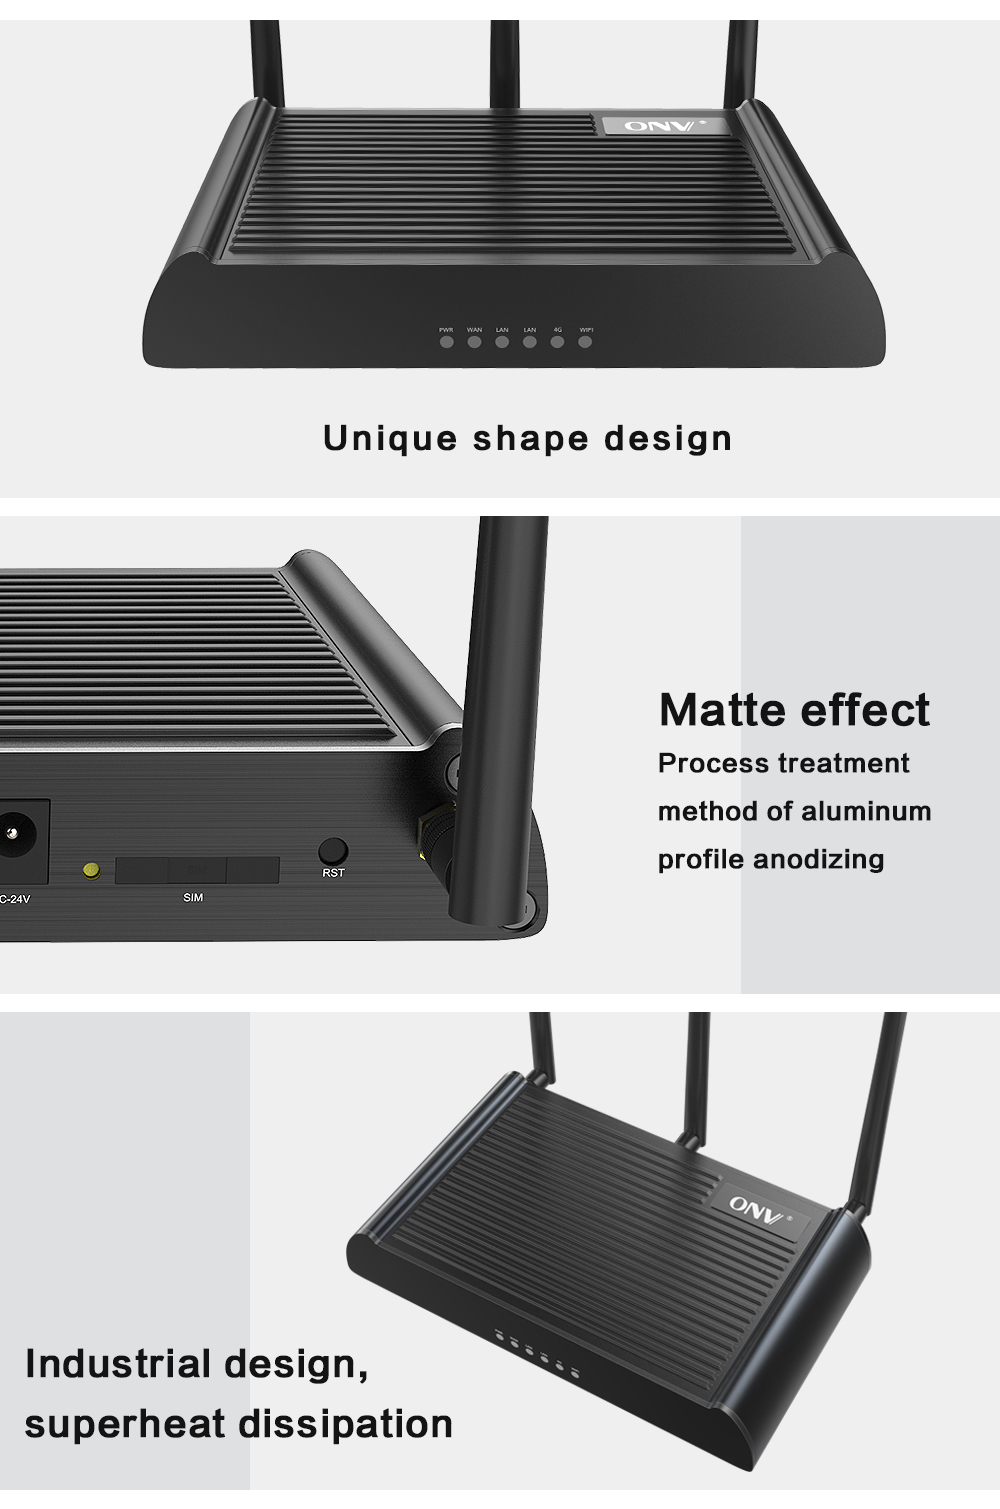 4G industrial wireless router，4G router，industrial router